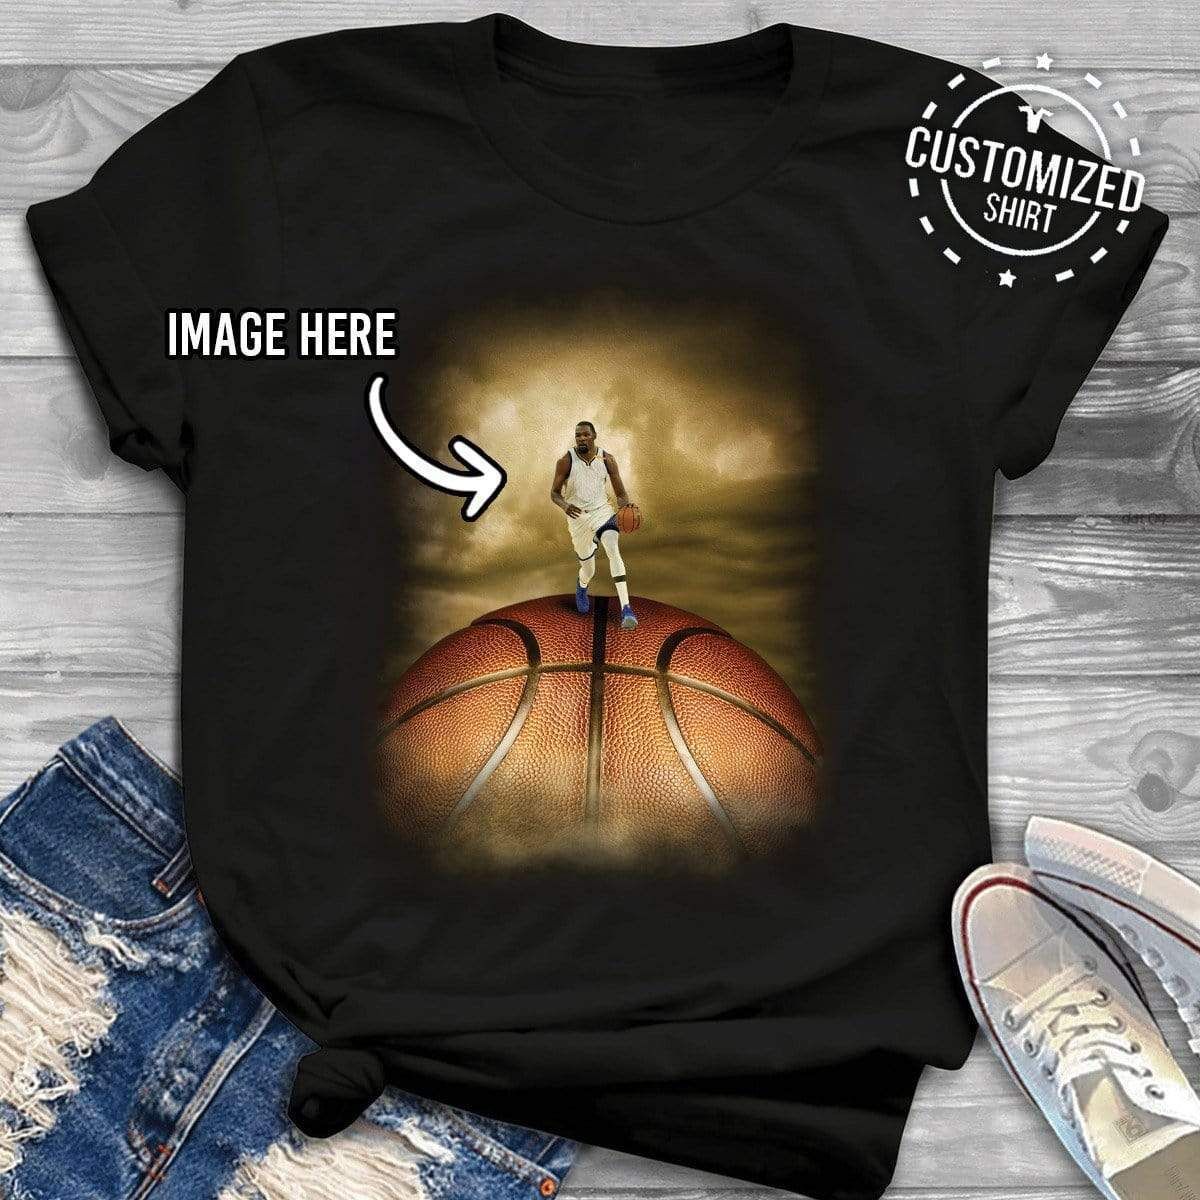 Personalized Custom T Shirts Basketball Design With Your Photo